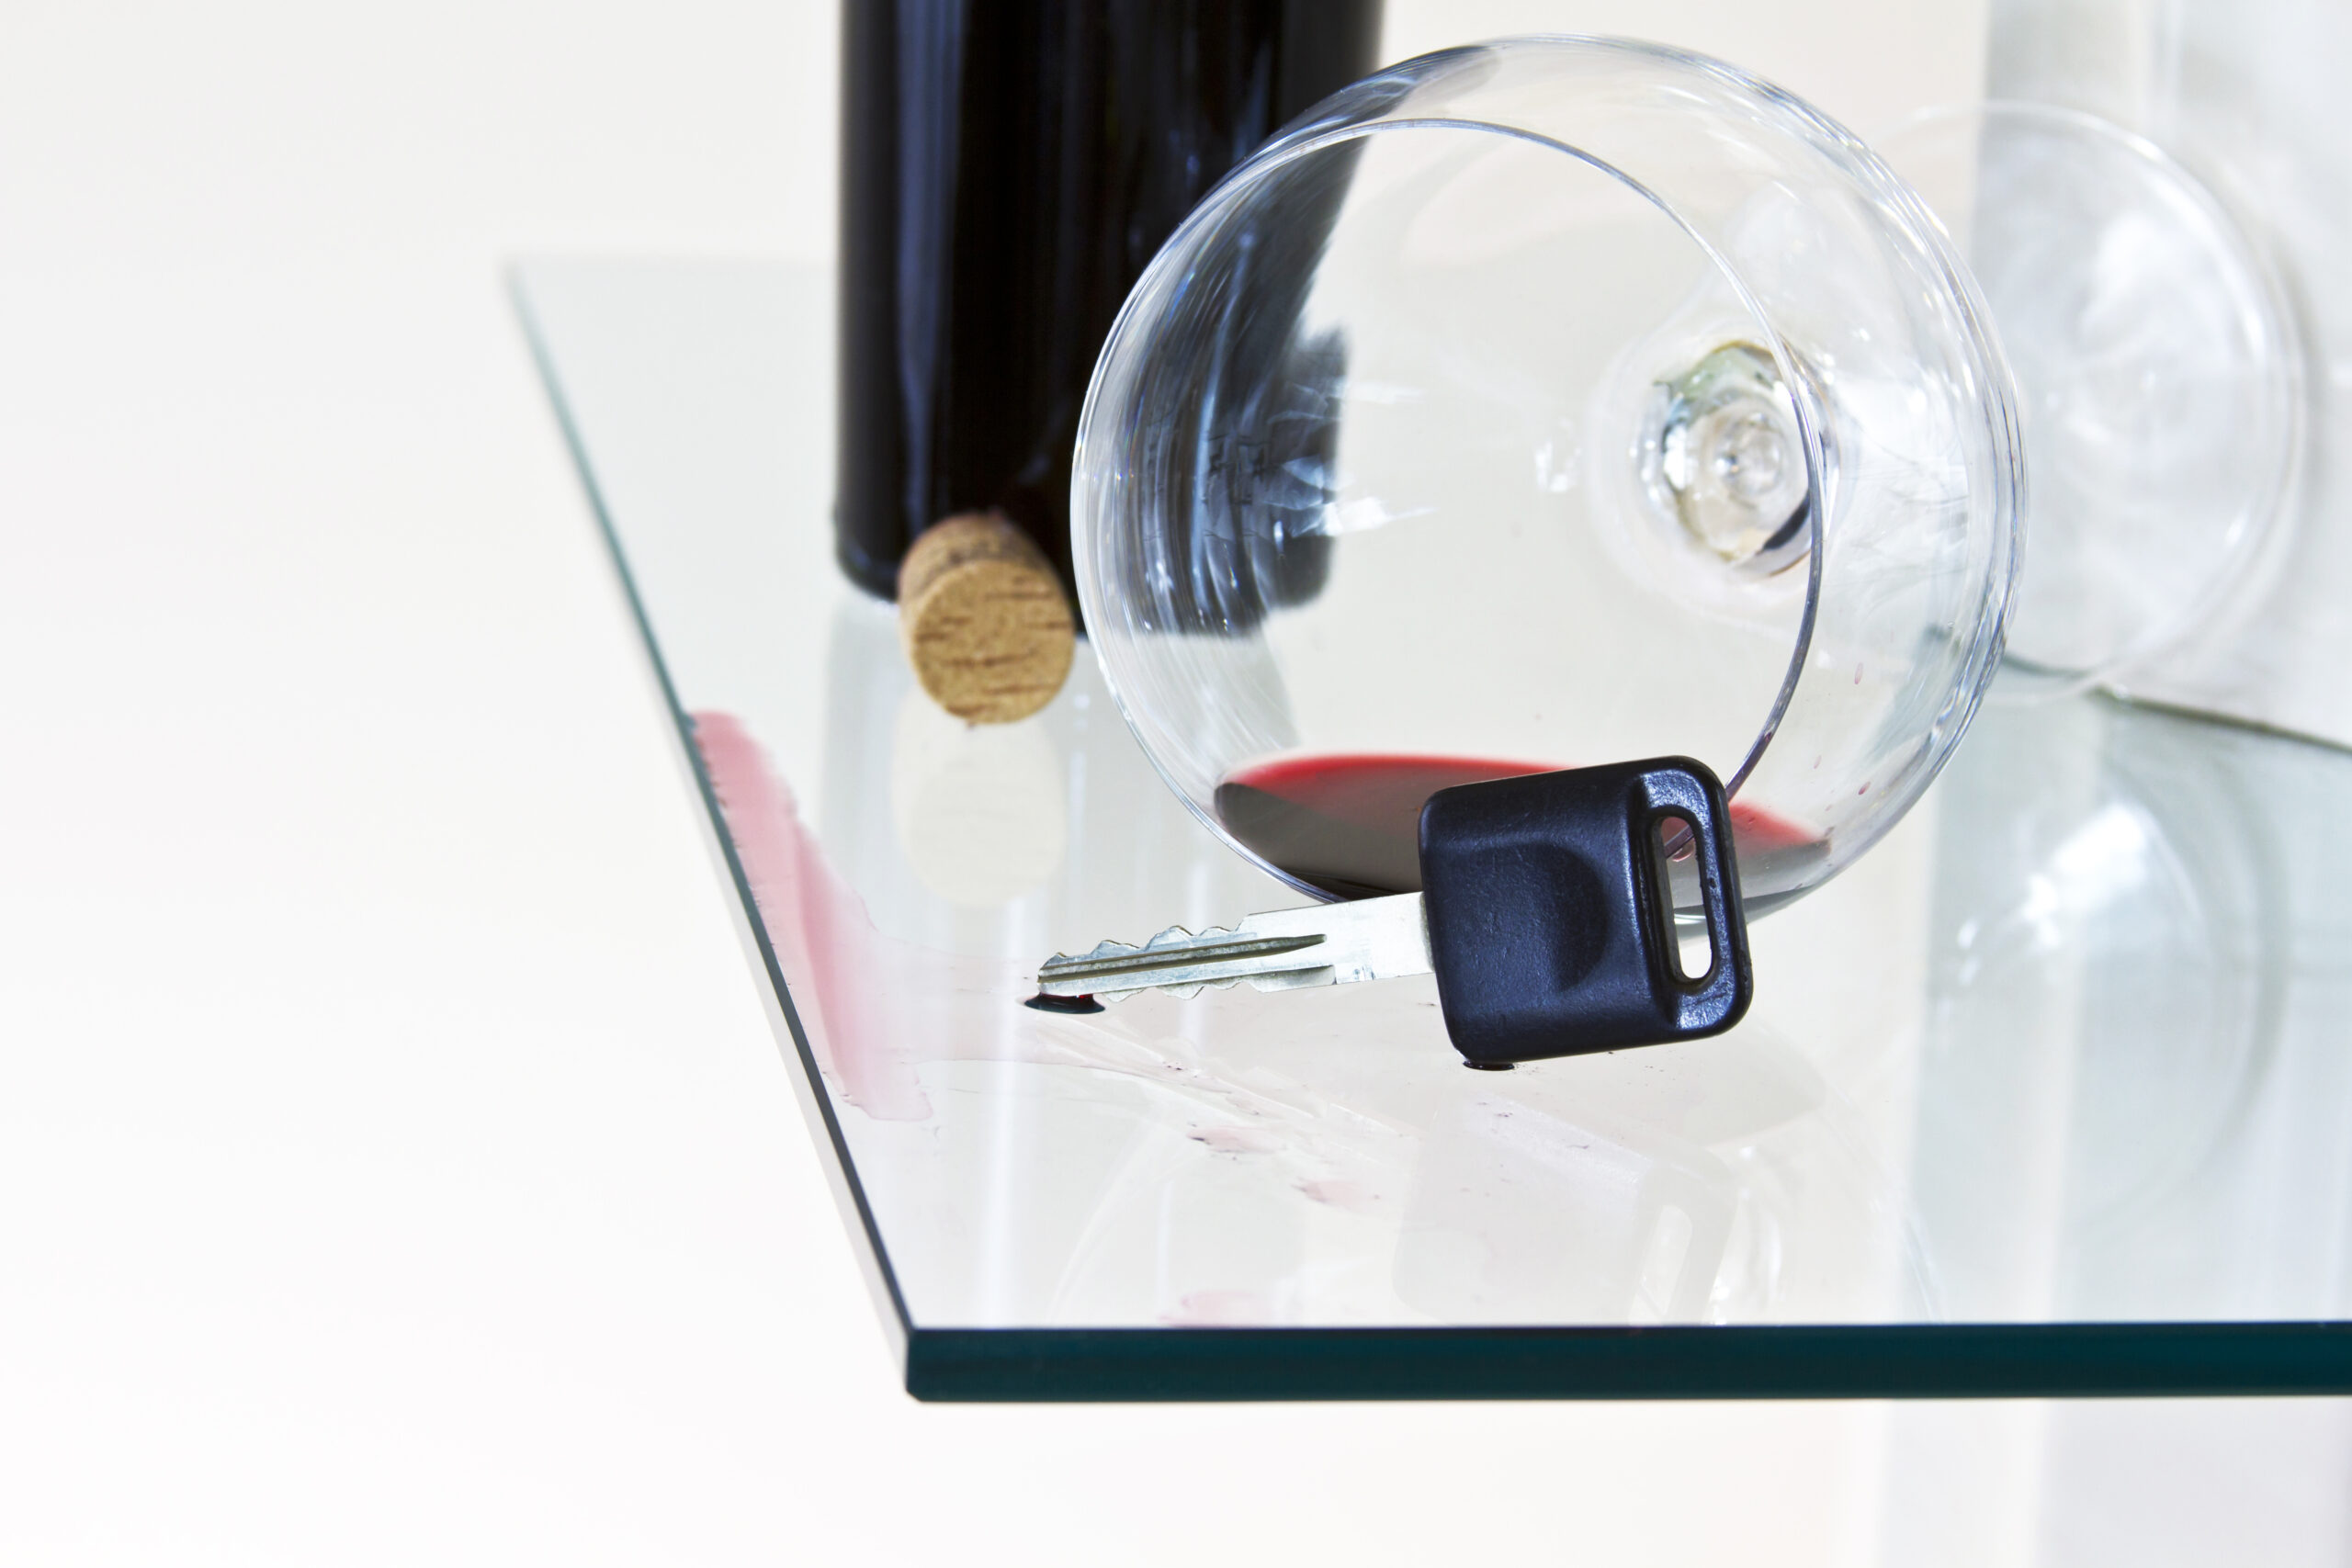 Spilled wine with car key and bottle of wine on glass bar top